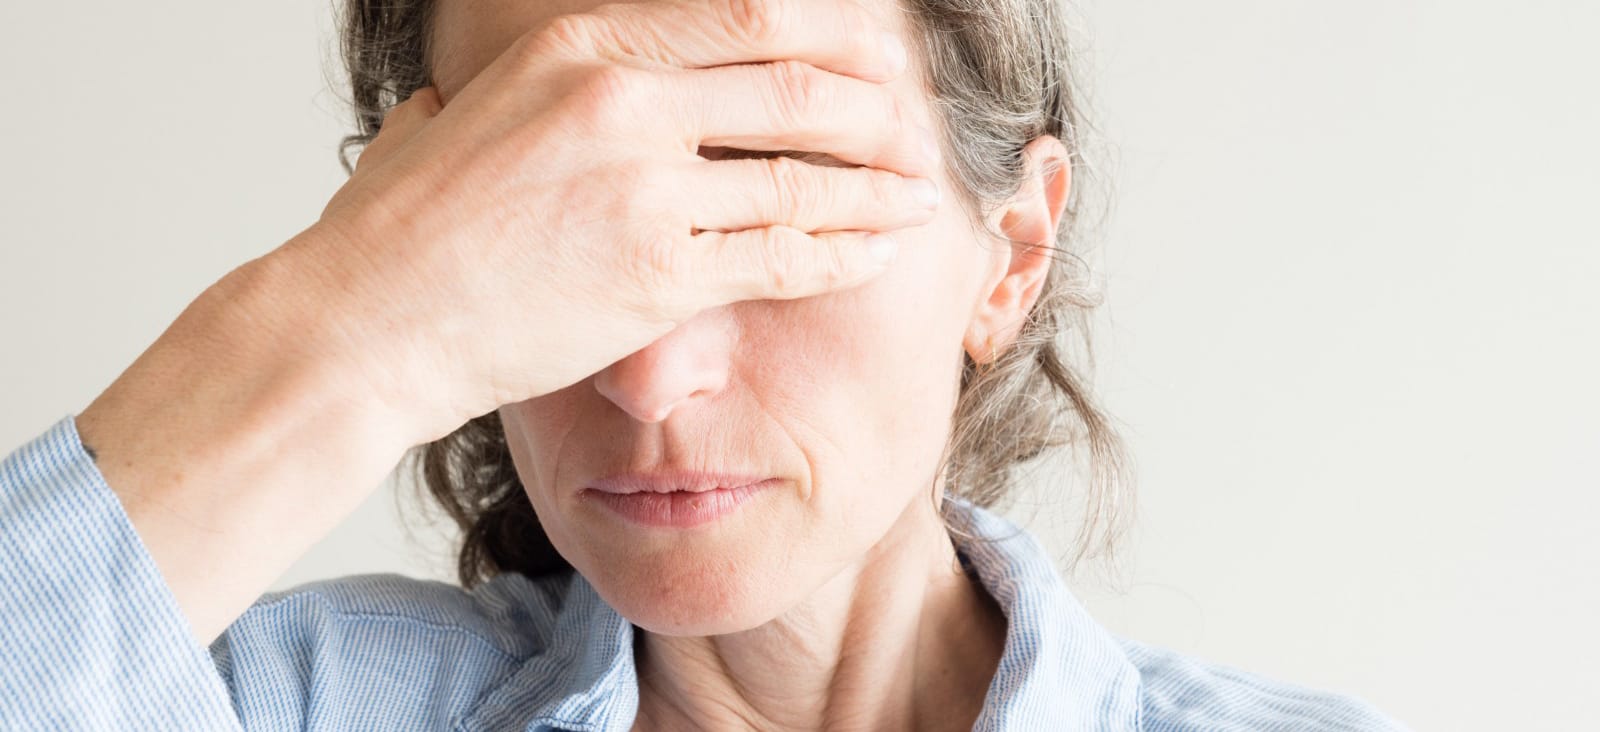 WHAT ARE THE RISKS OF MENOPAUSE?